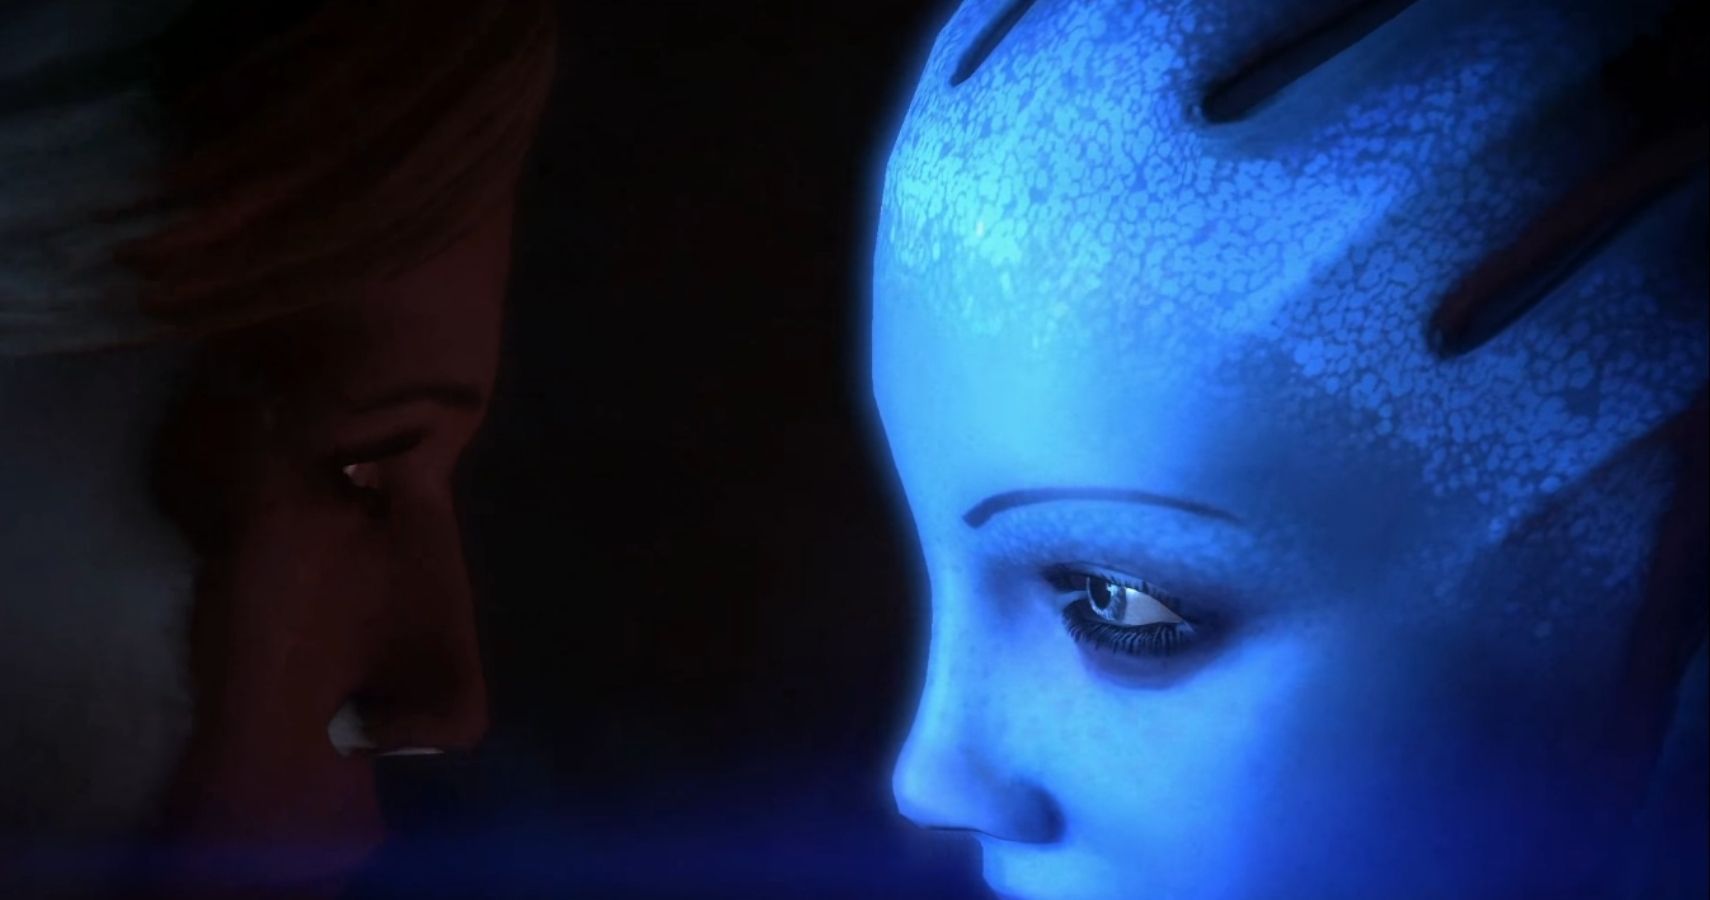 Cutting Out Mass Effect 2’s Queer Content Was Actively Damaging To Bisexual Representation